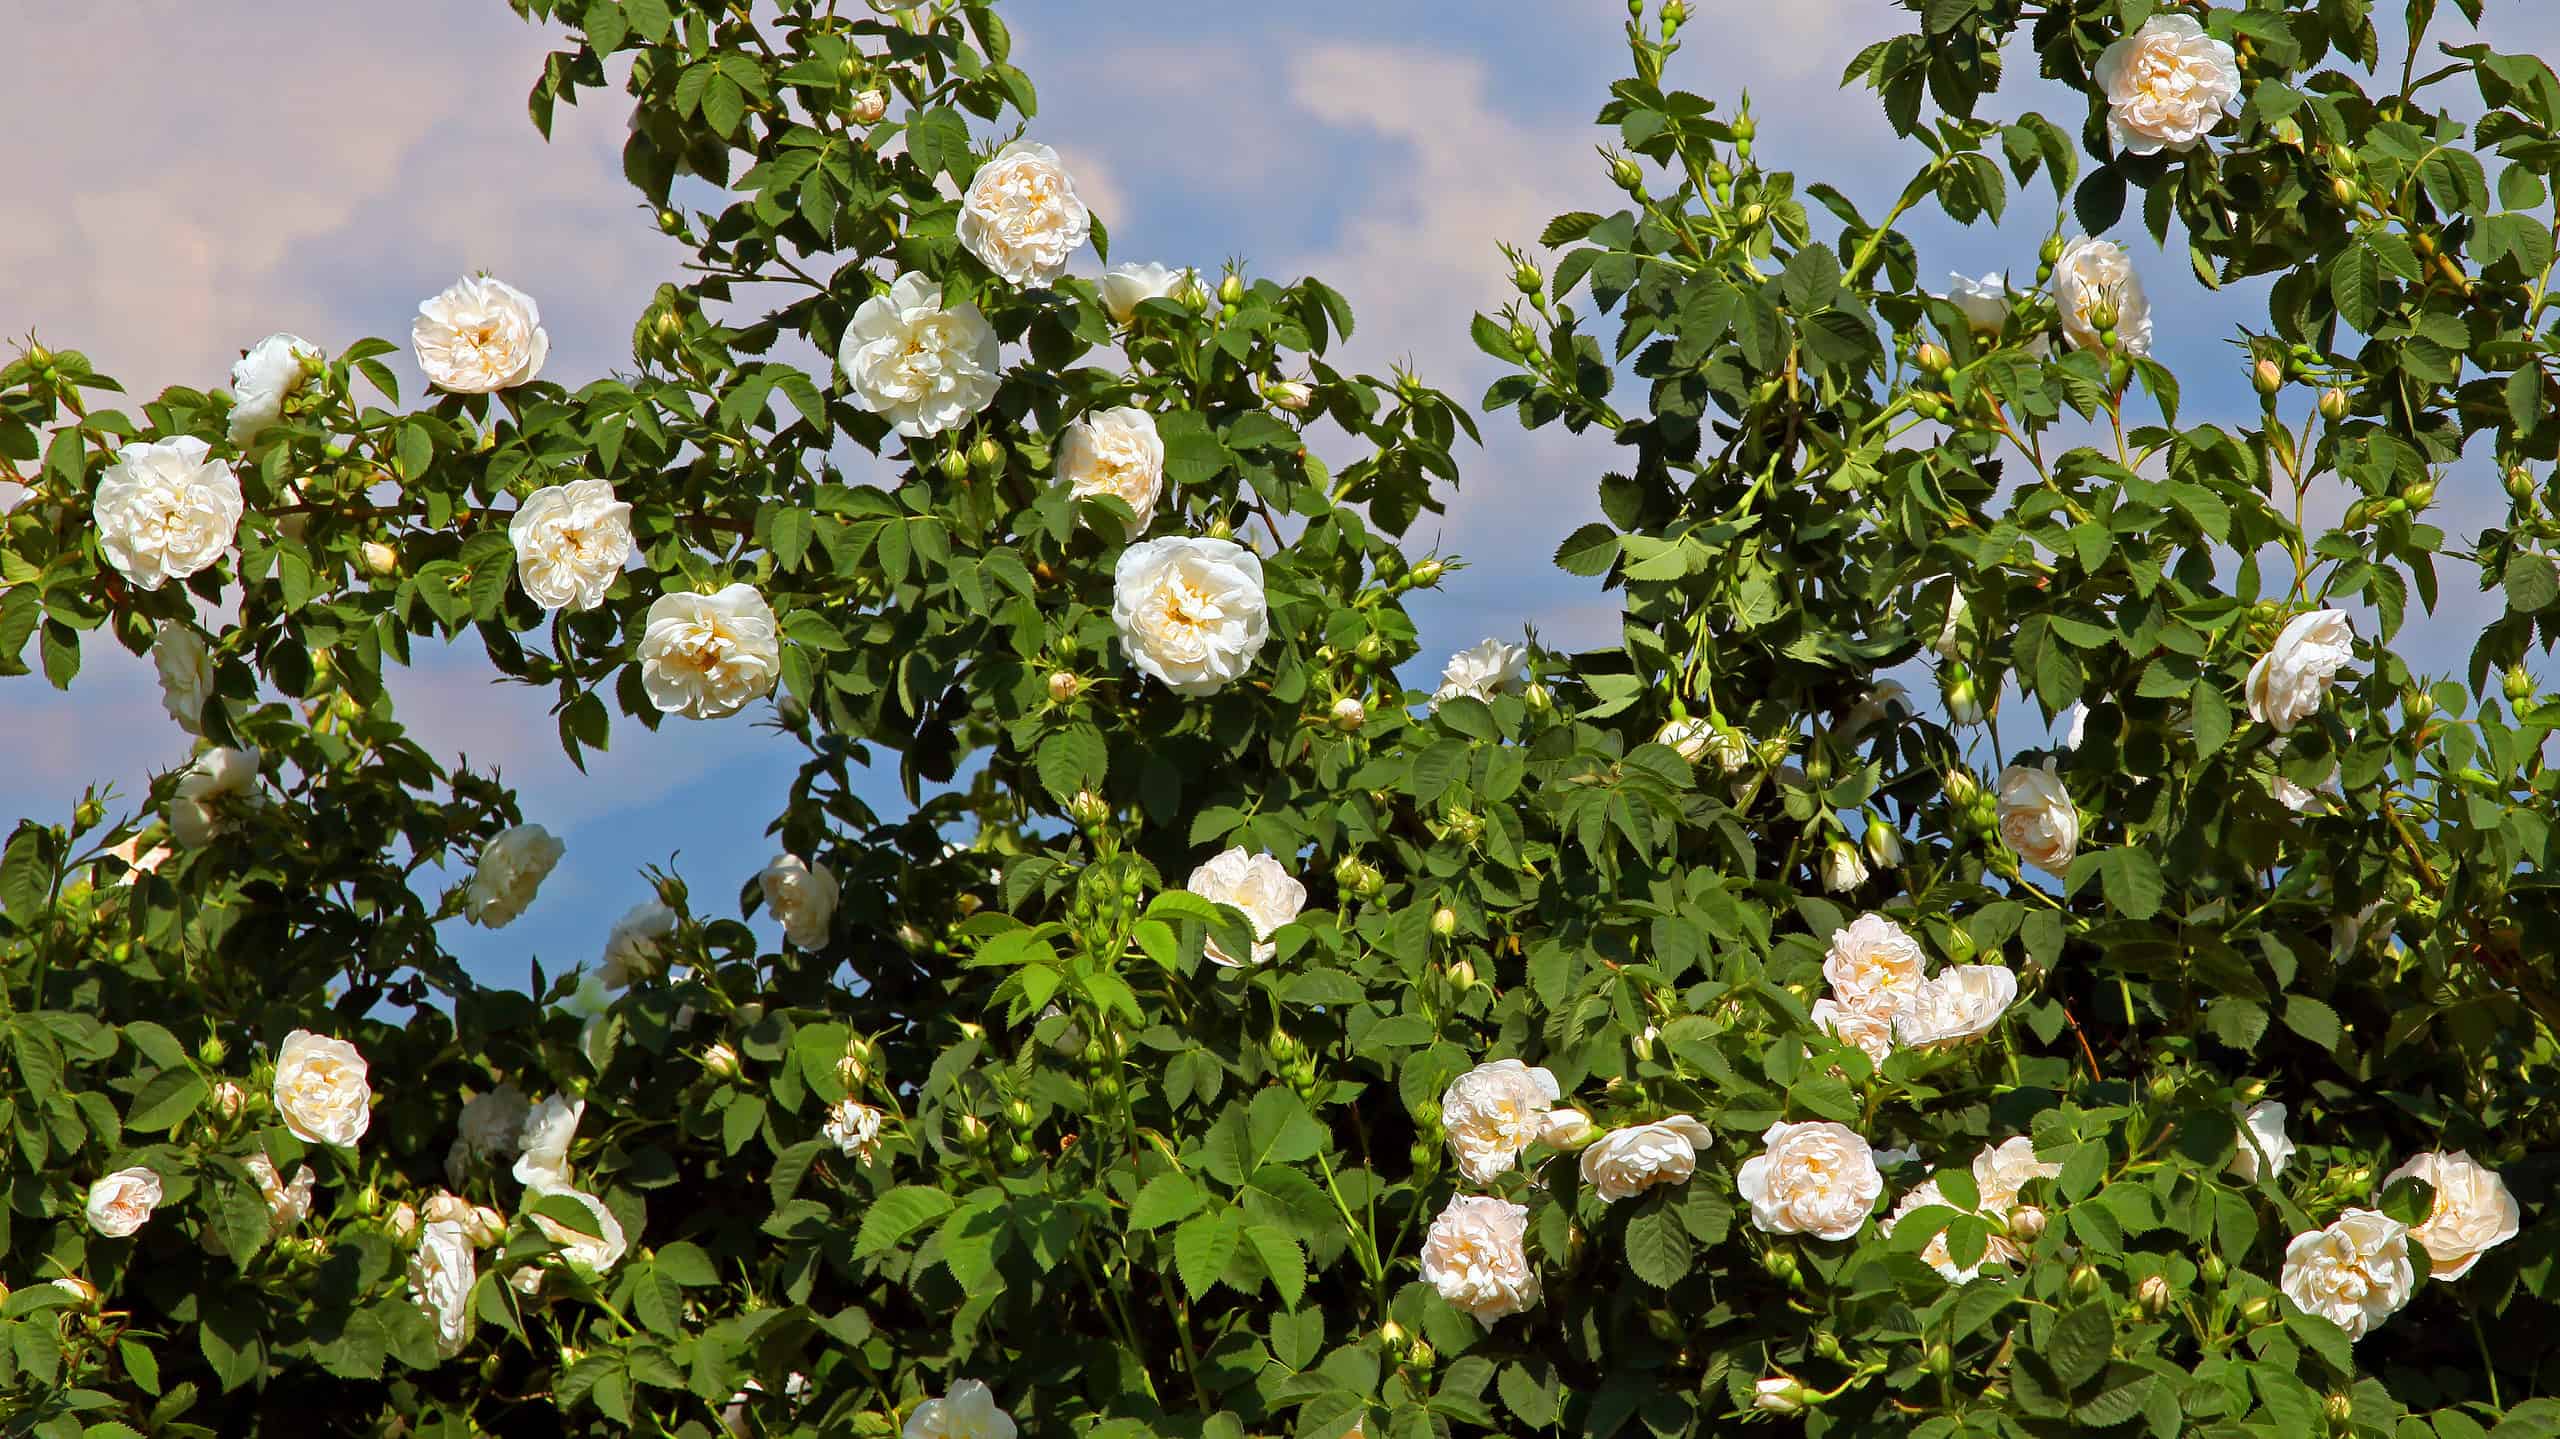 A bush of Alba roses with white flowers growing under blue sky